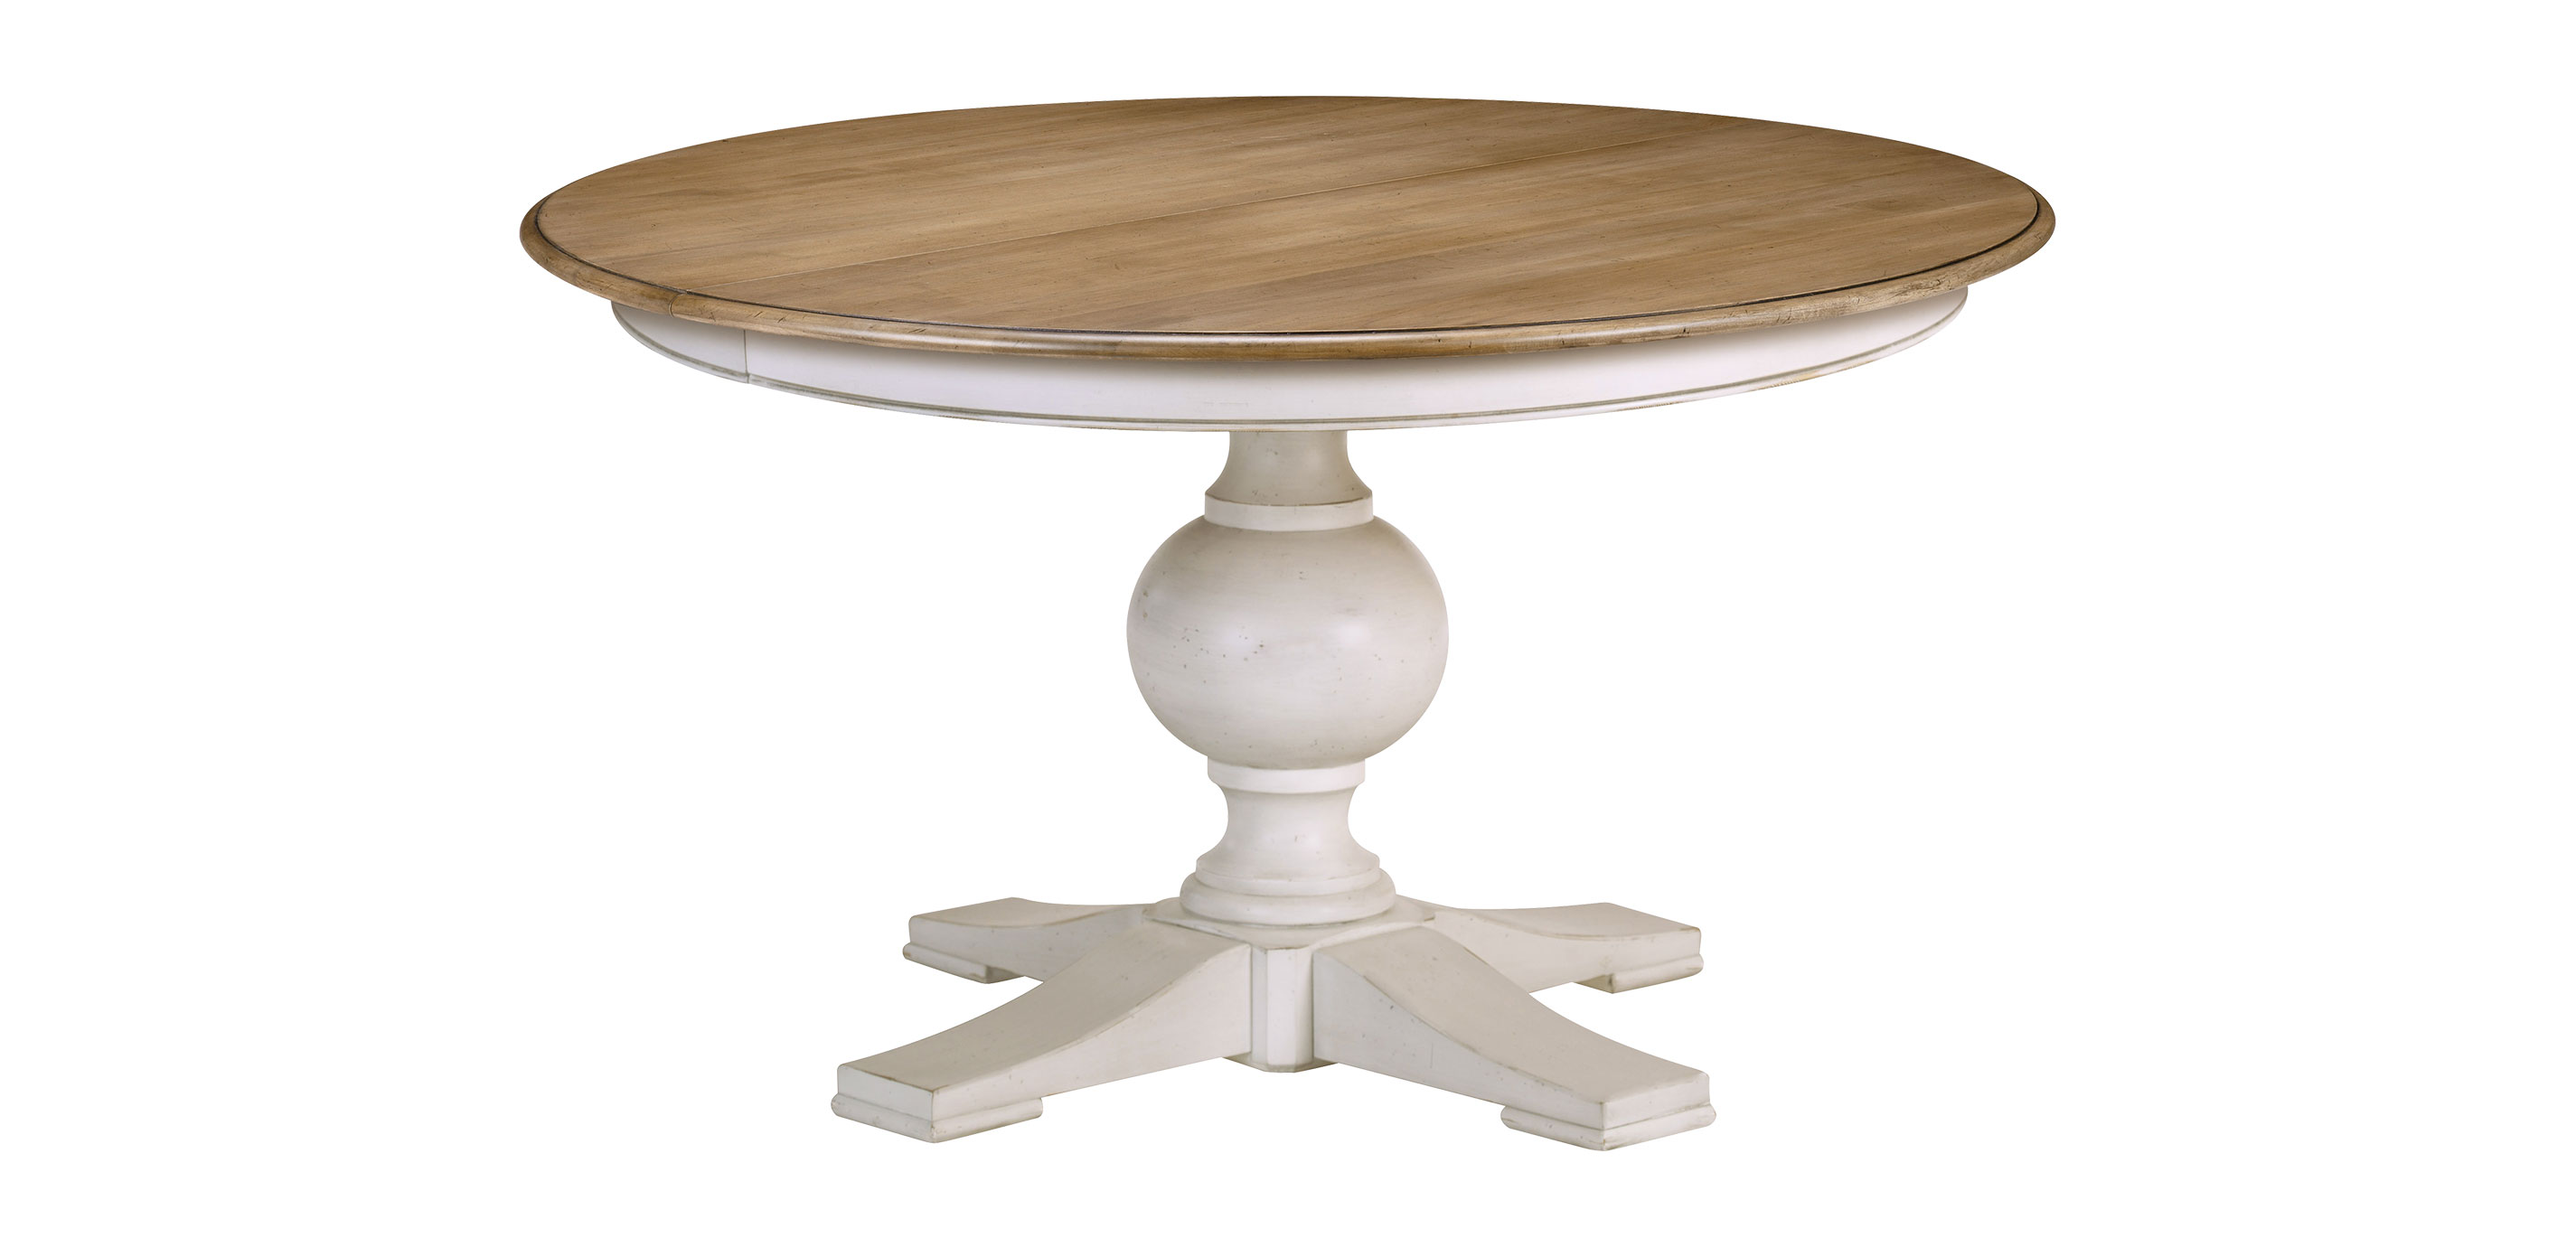 Cooper Round Dining Table, 48 Inch Round Pedestal Table With Leaf